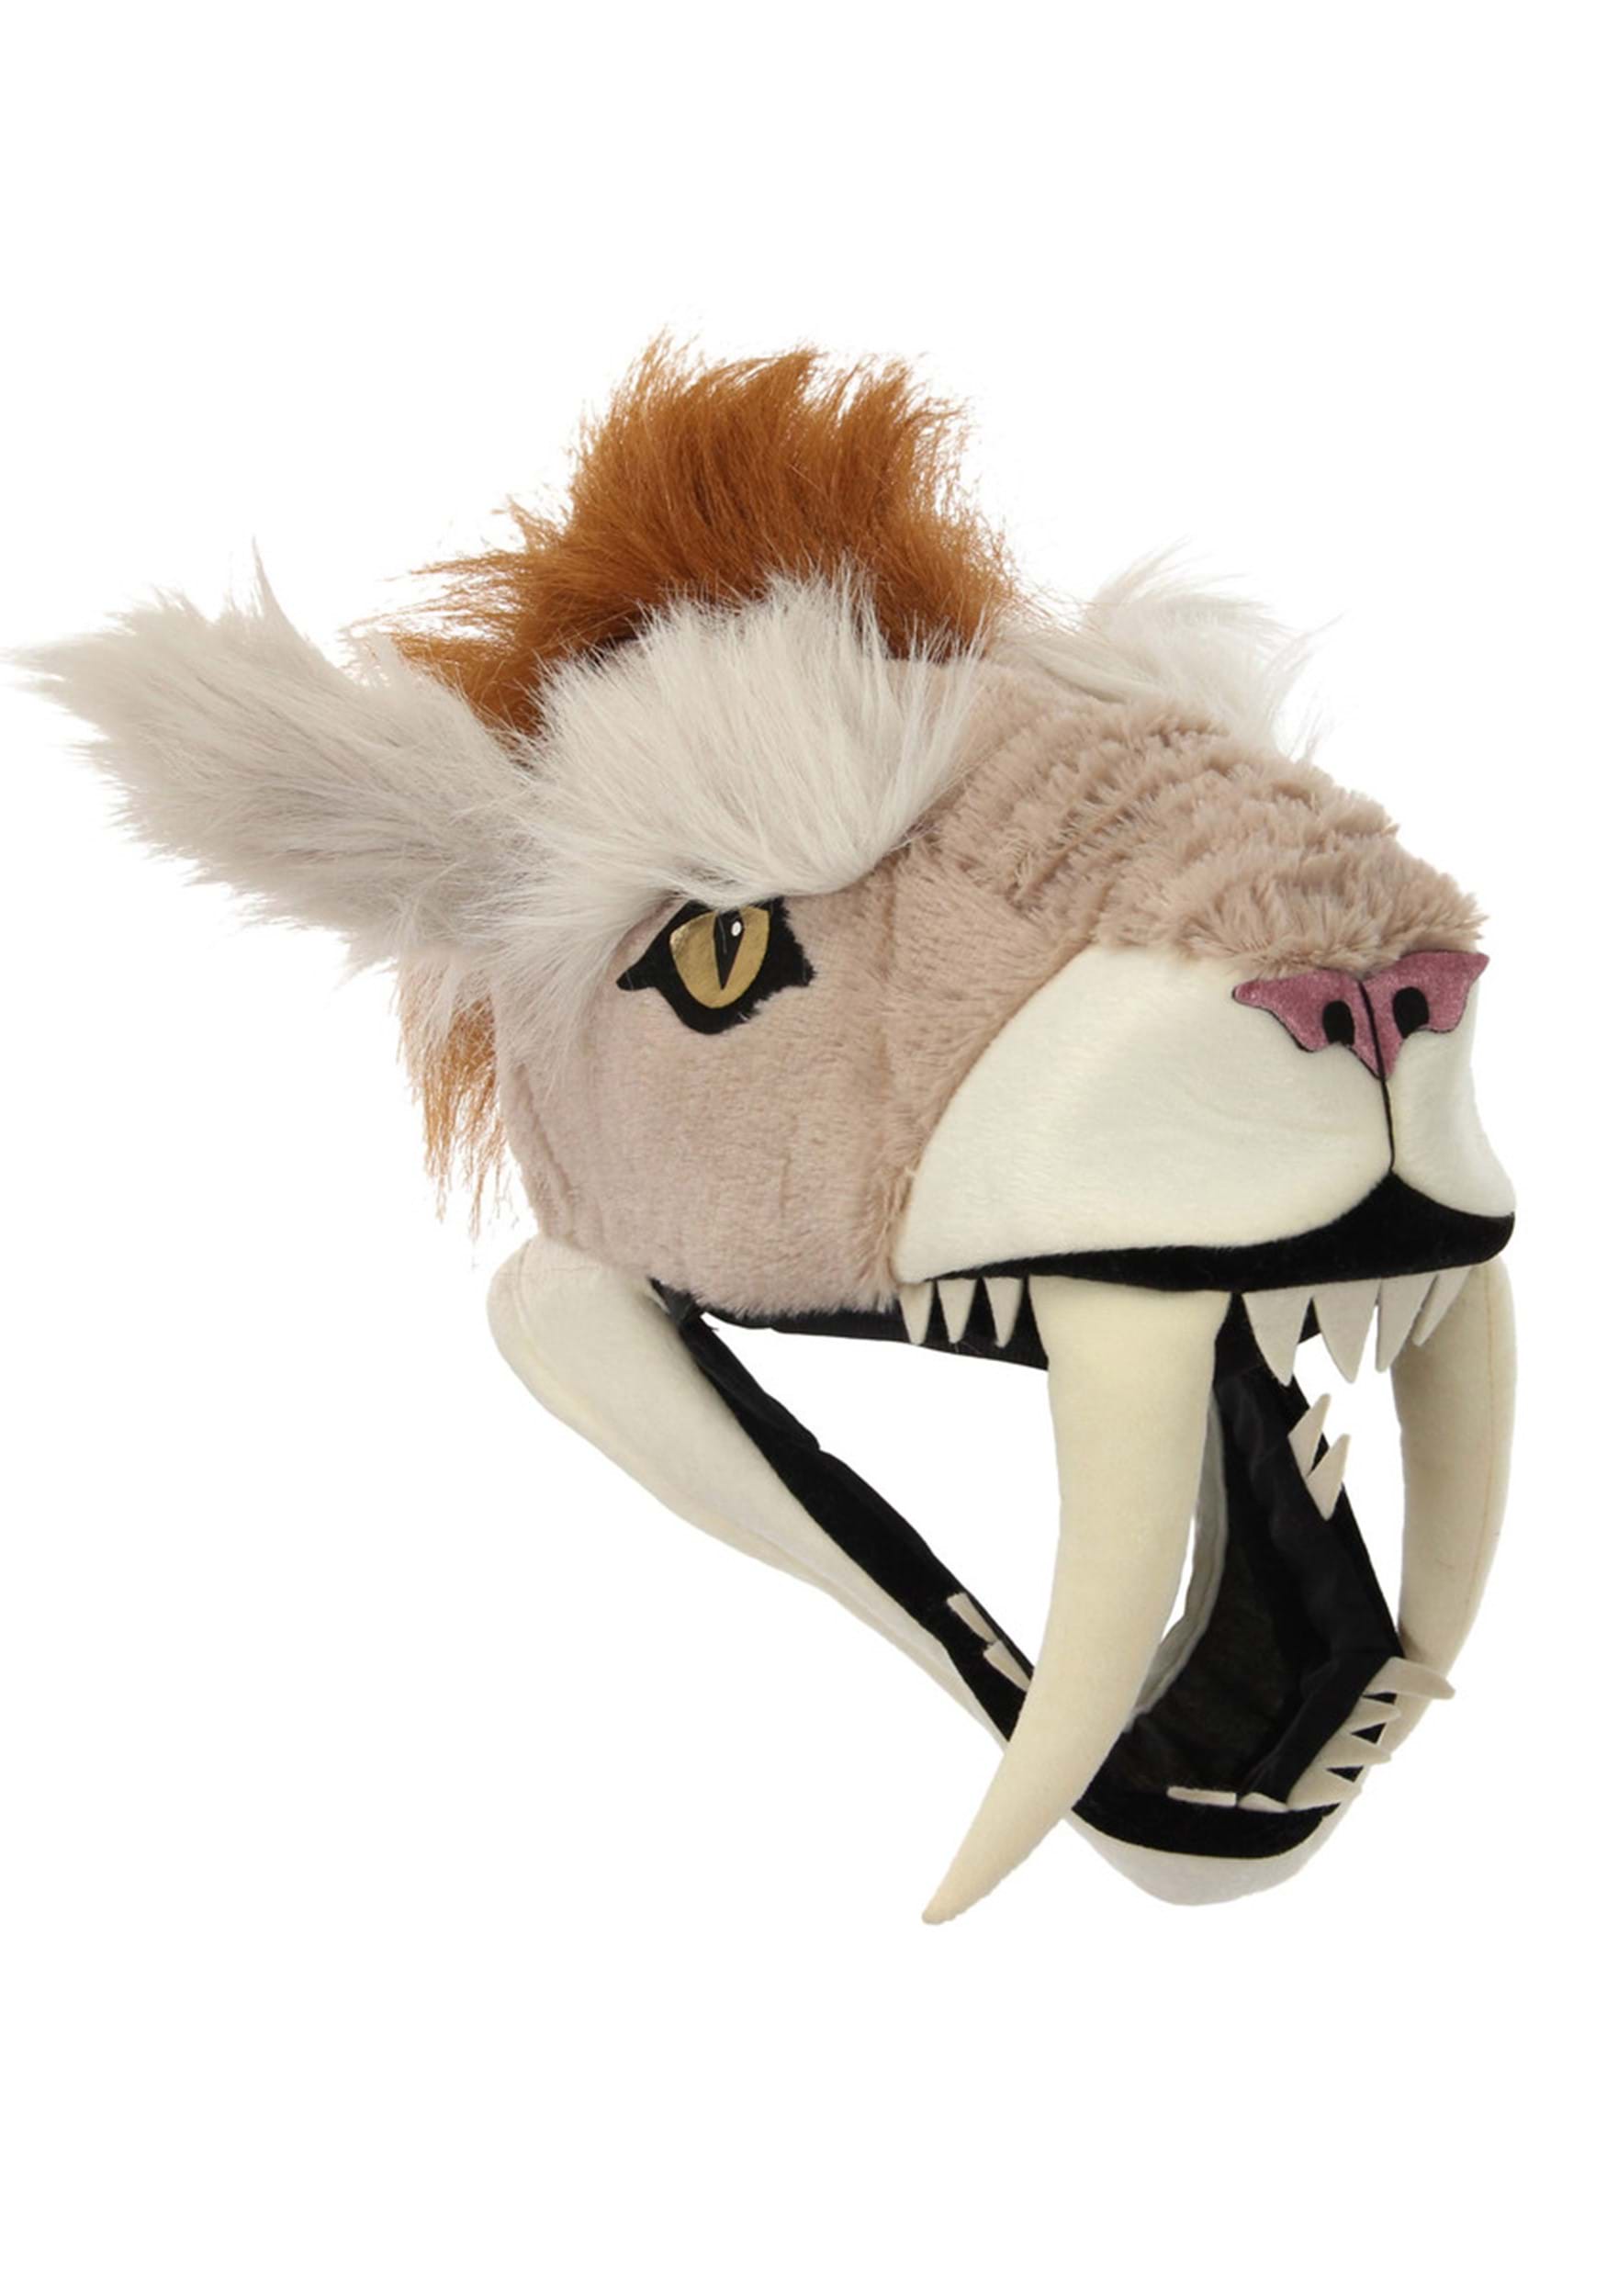 Sabertooth Jawesome Hat Costume Accessory